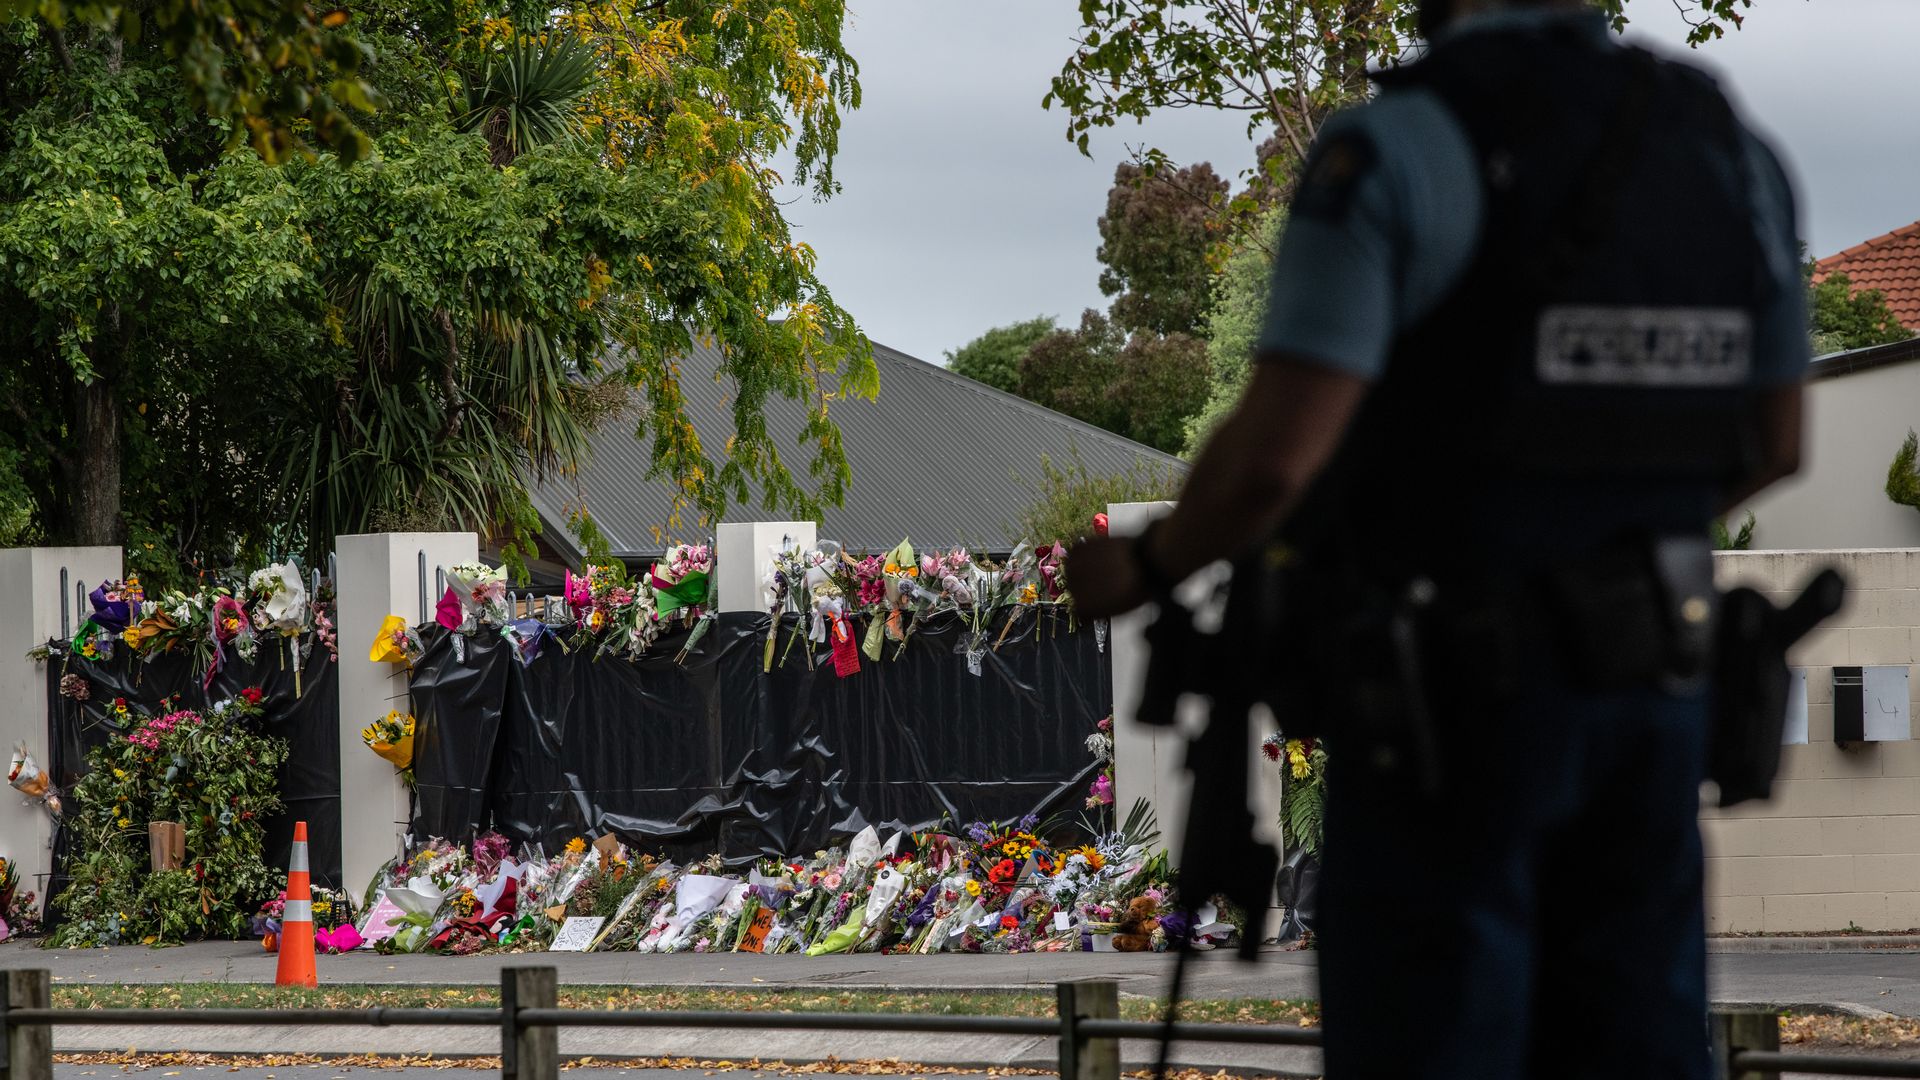 New Zealand Police mistakenly named someone who is alive as being a murder victim in the Christchurch attacks.